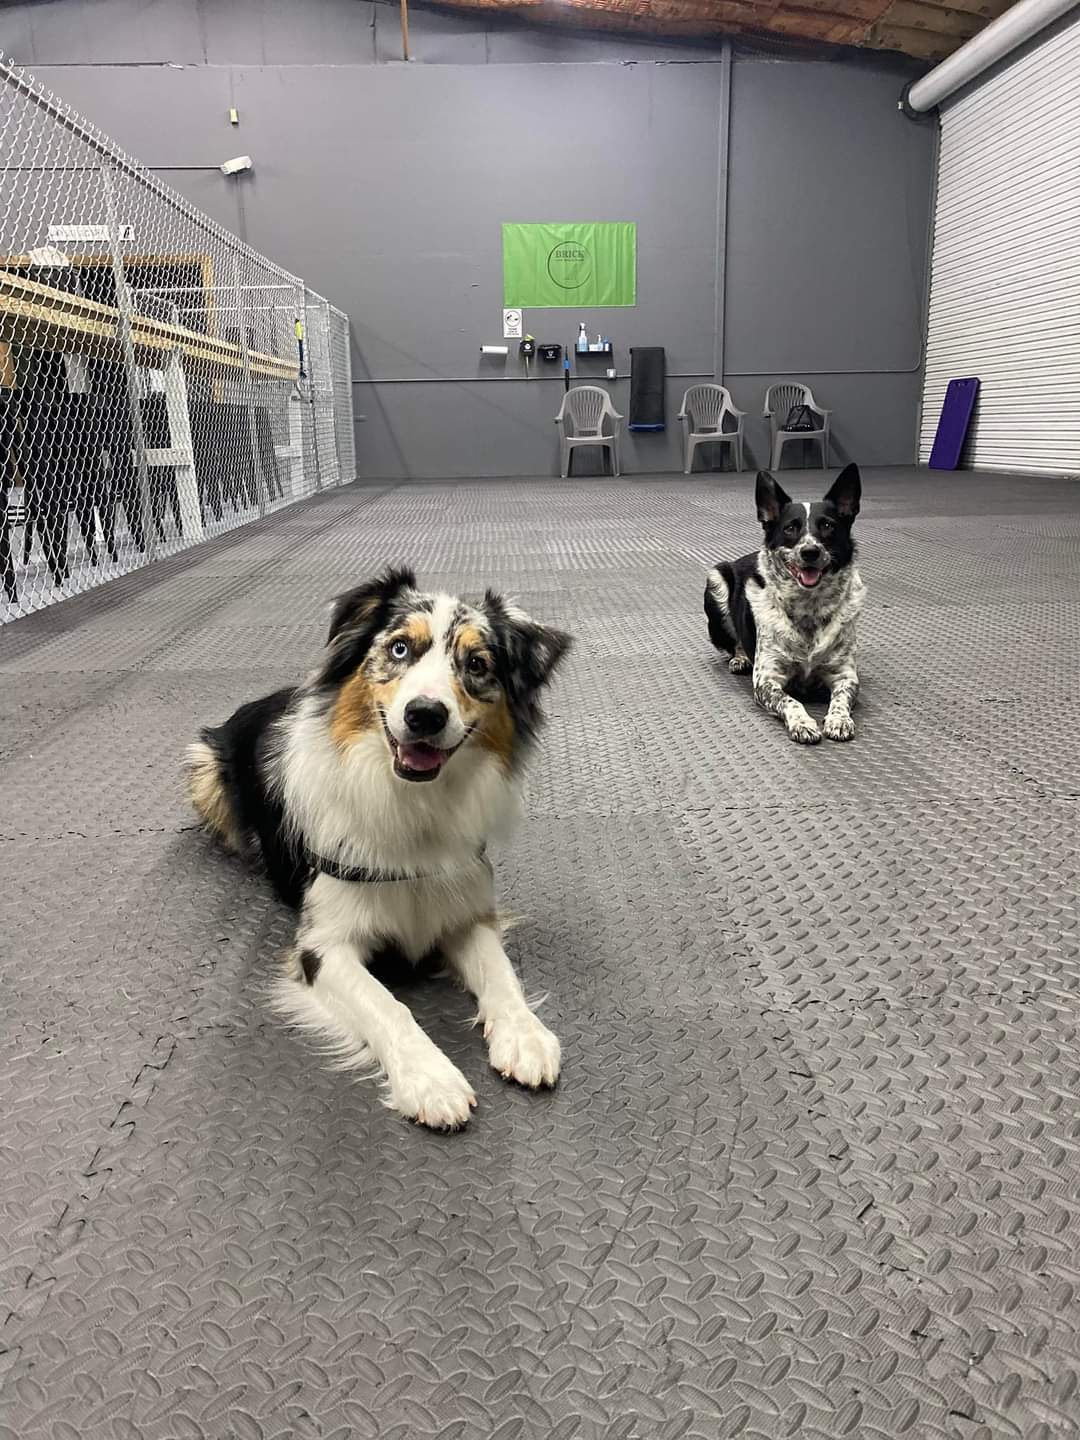 Fear-Free certified owner opens innovative indoor dog park, daycare & boarding facility